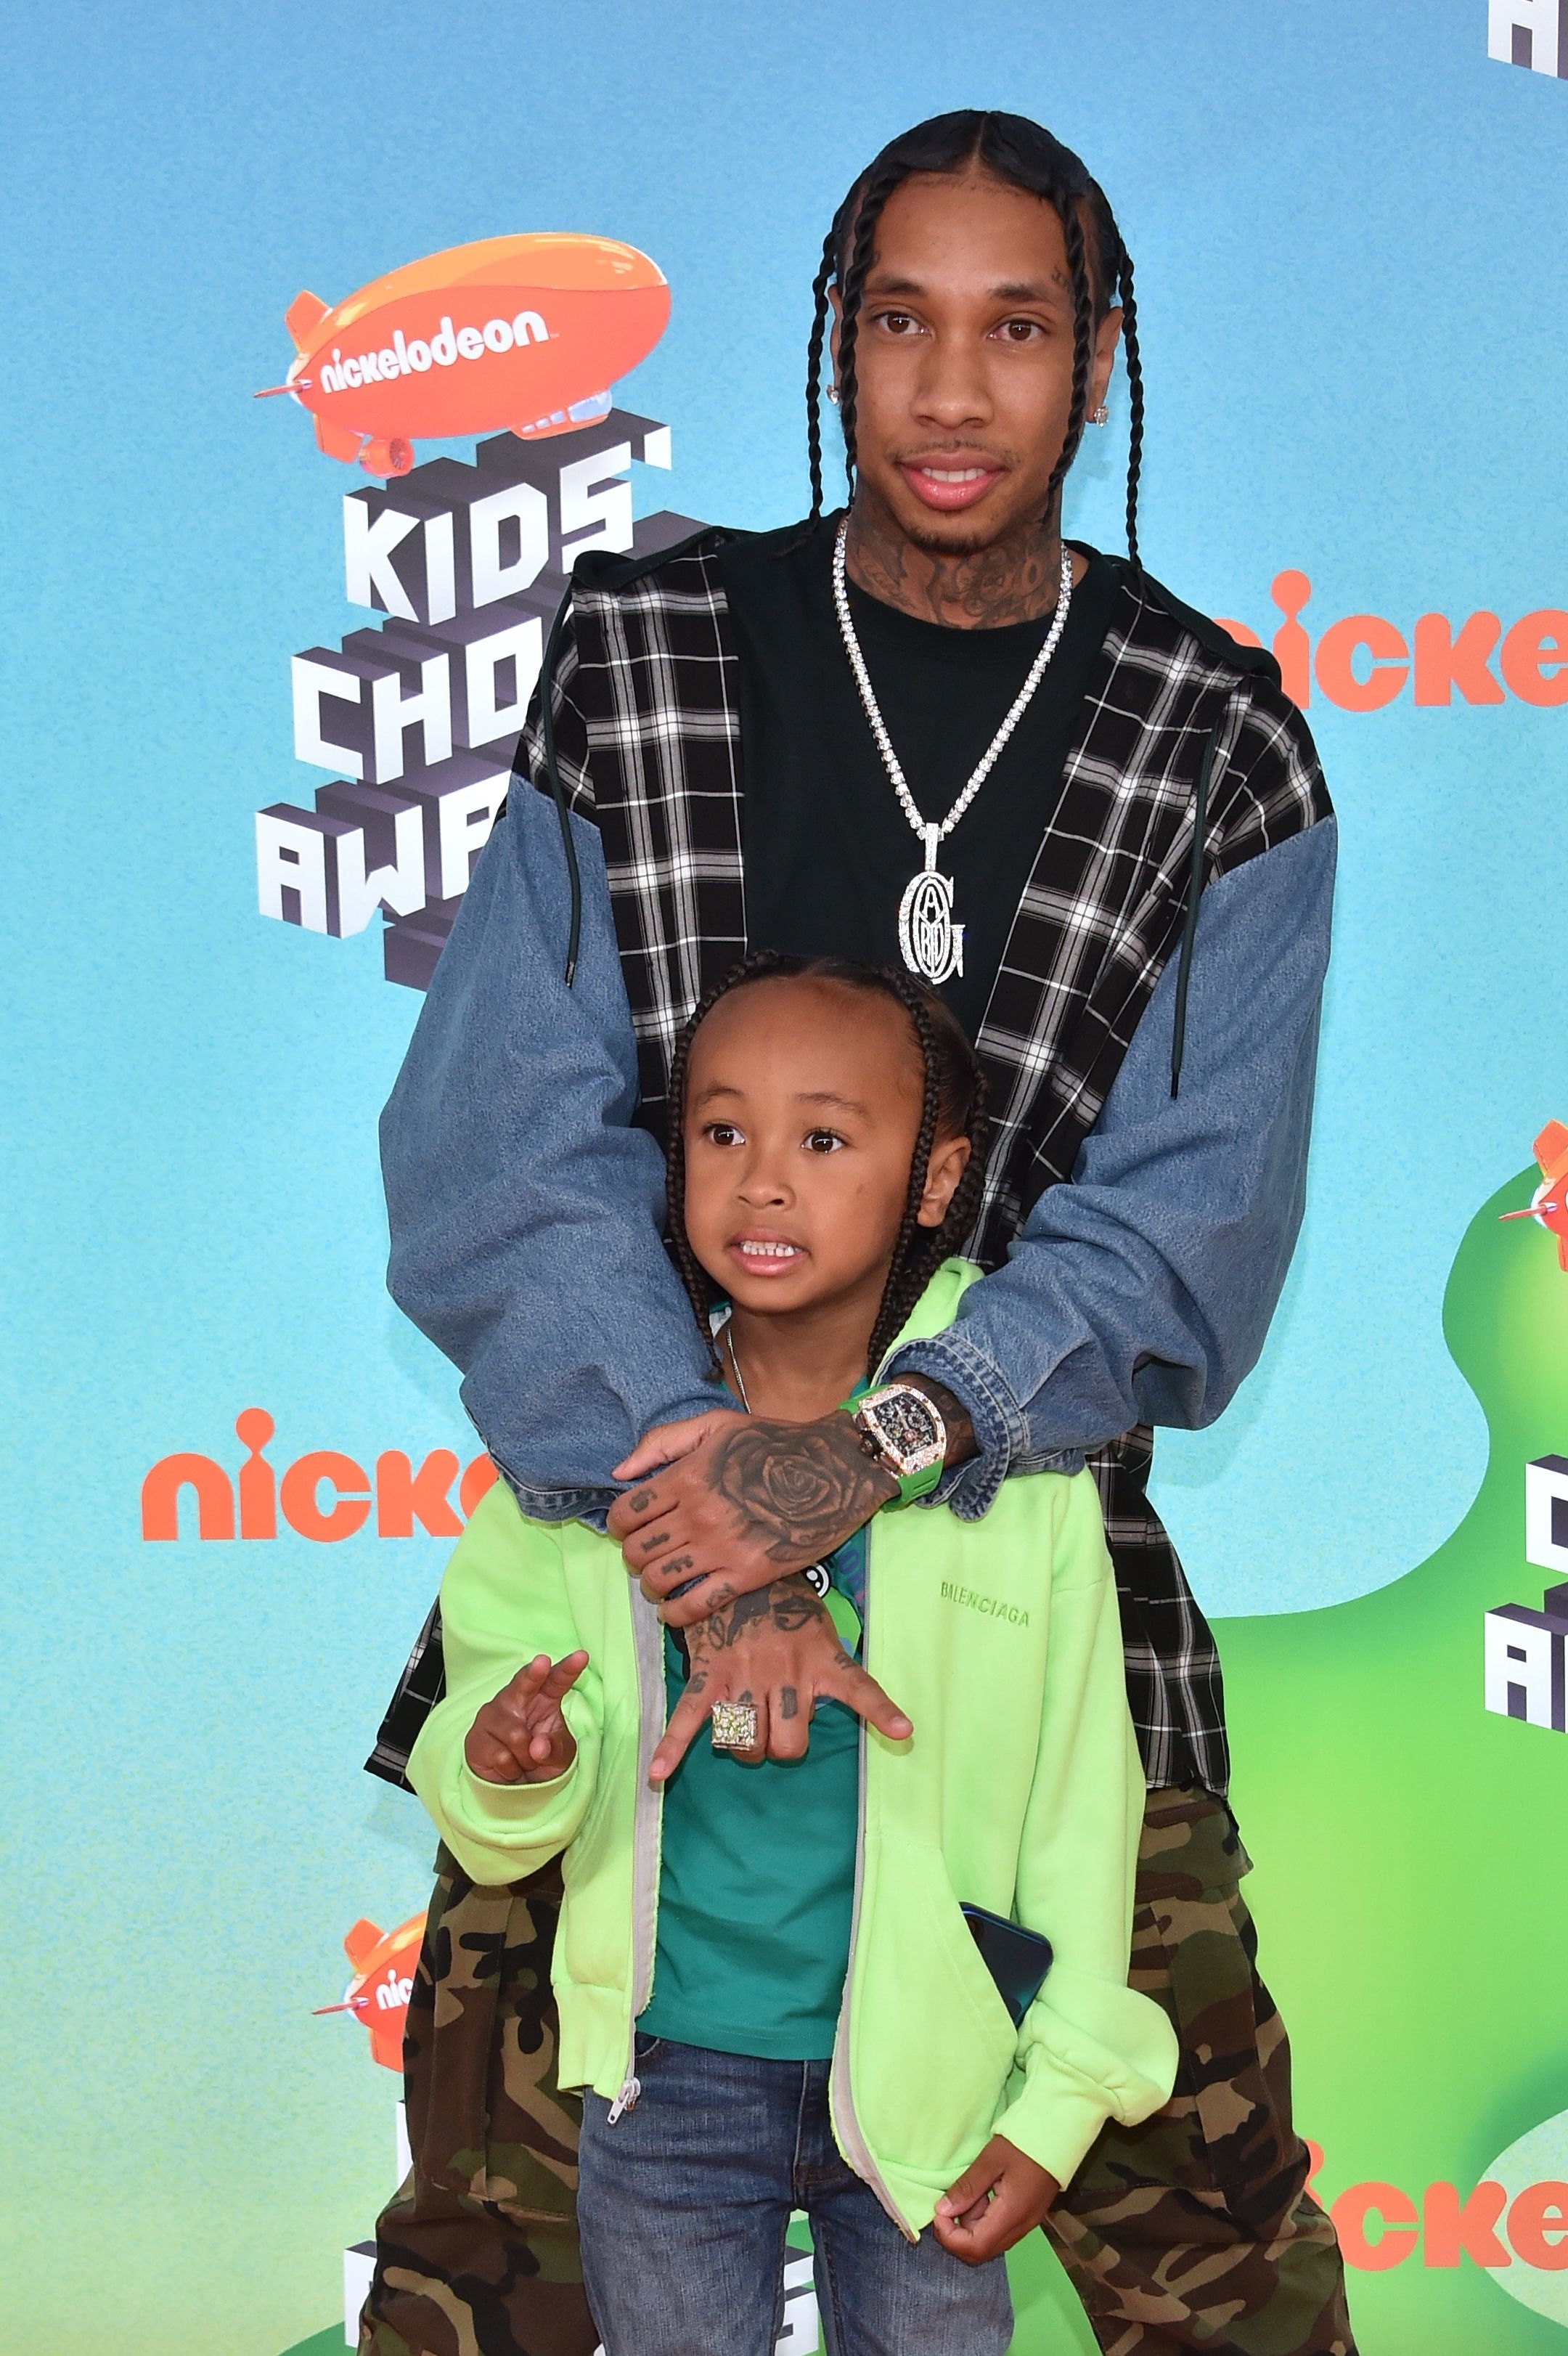 tyga and his son at an event